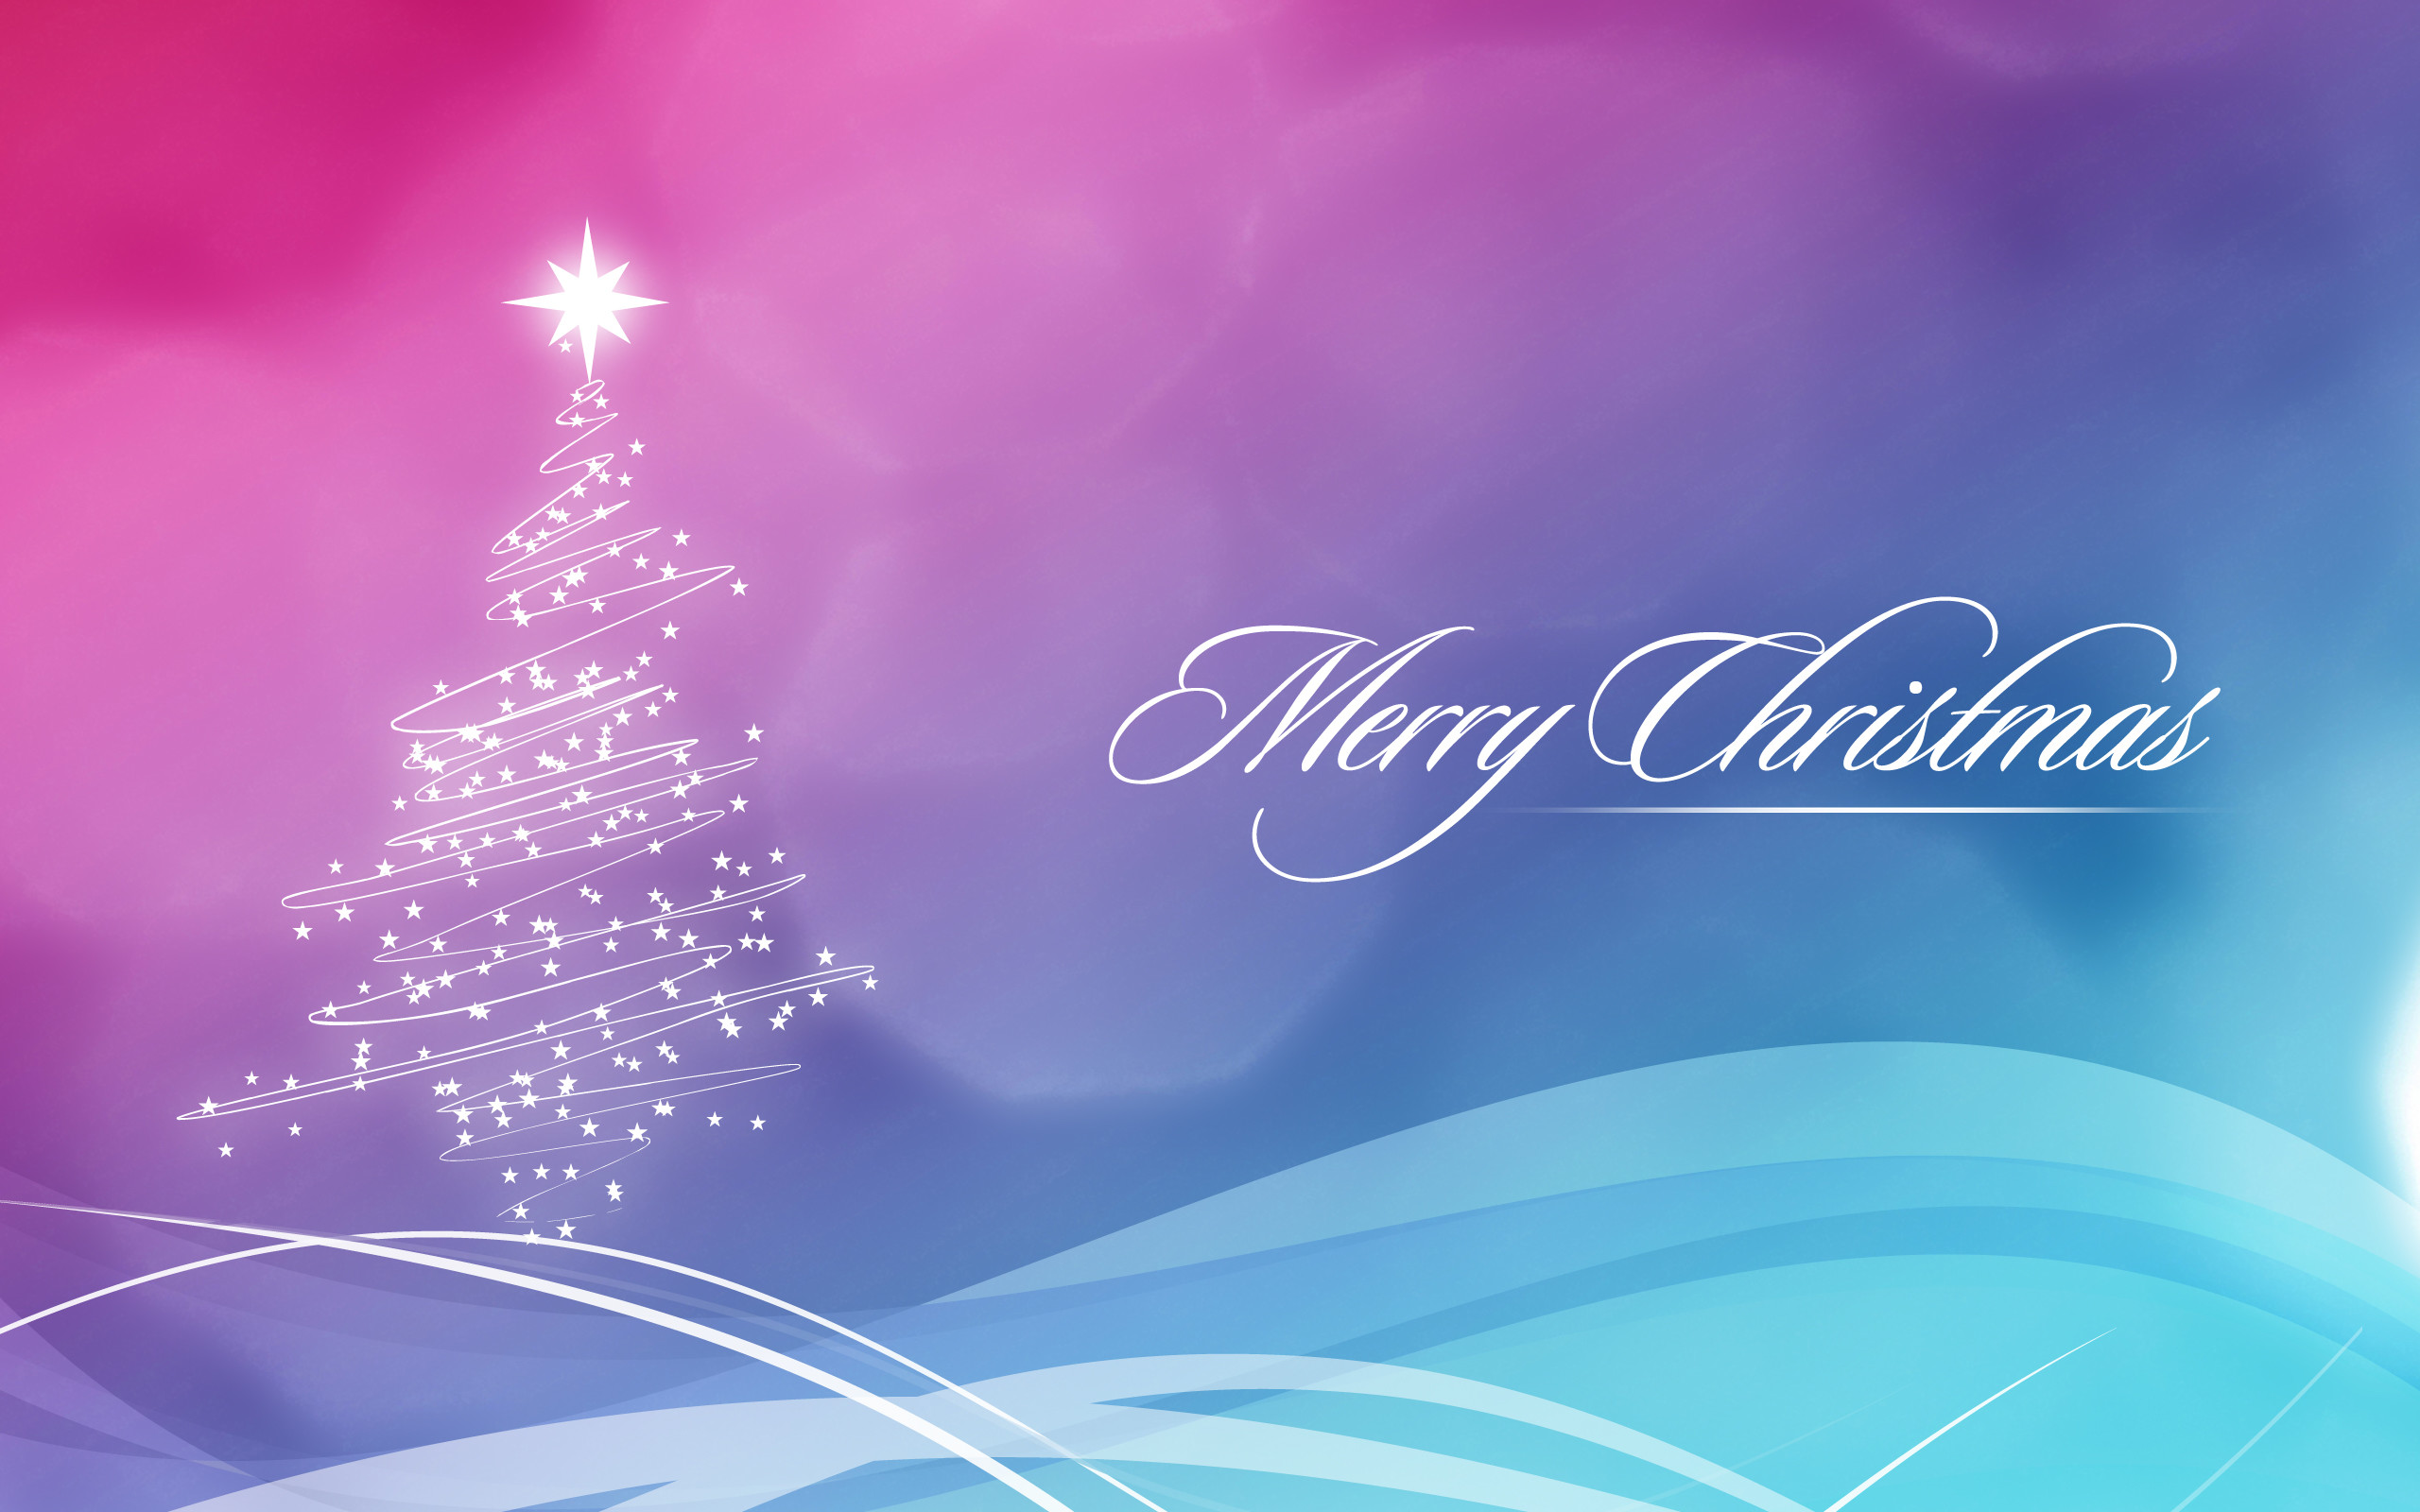 2560x1600 Blue and Pink Christmas Wallpaper wallpapers and stock photos